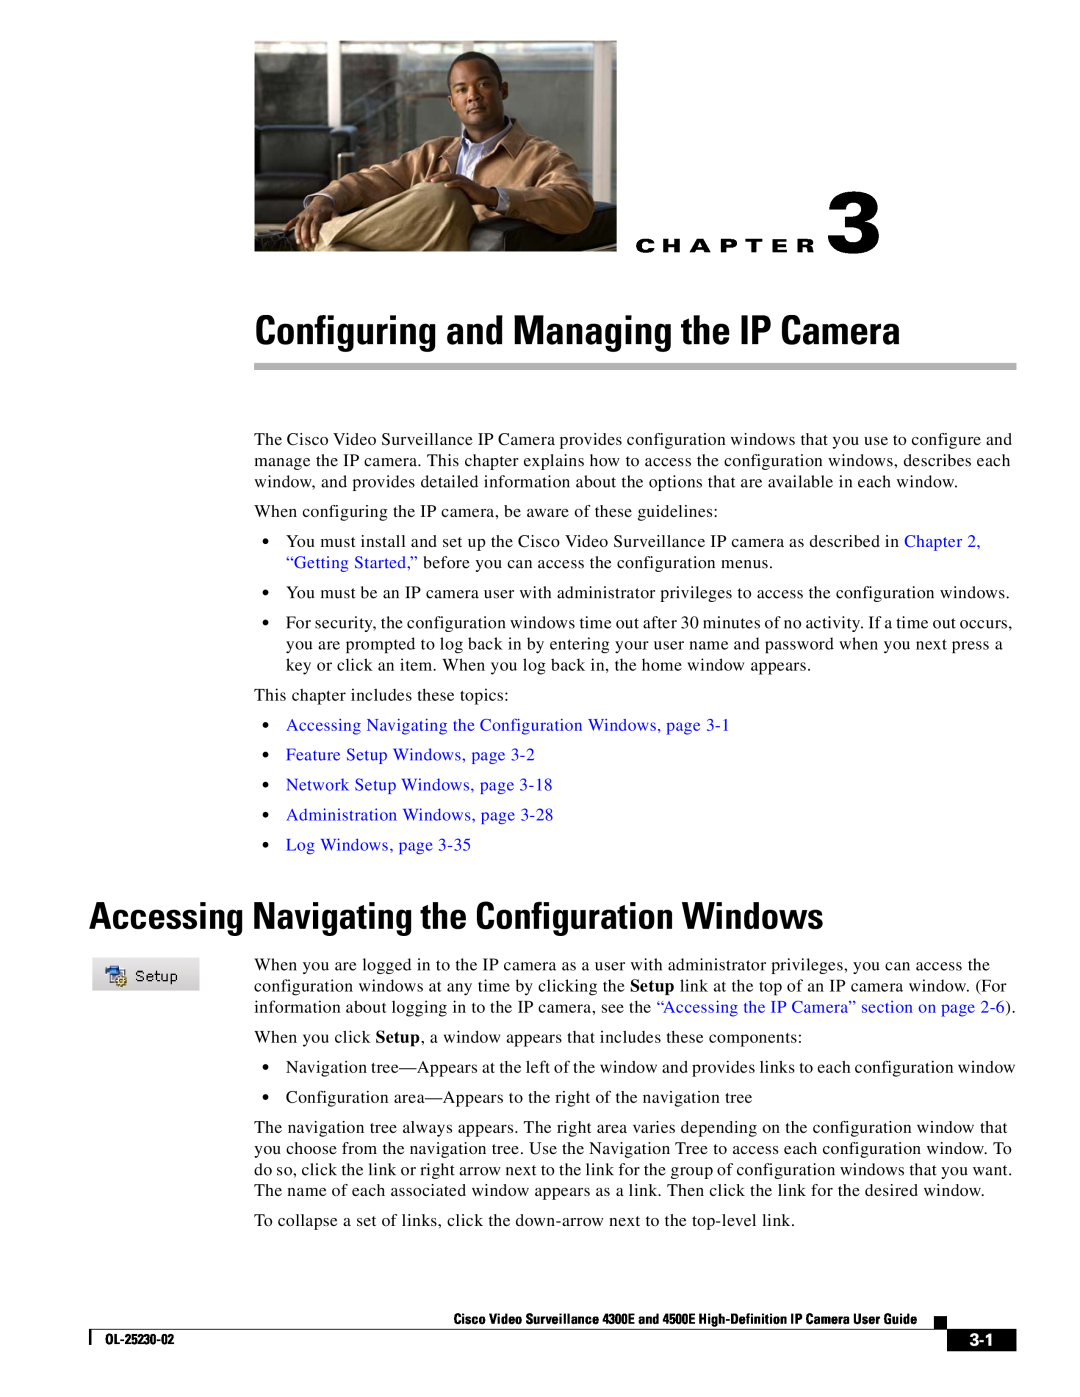 Cisco Systems 4300E Configuring and Managing the IP Camera, Accessing Navigating the Configuration Windows, C H A P T E R 